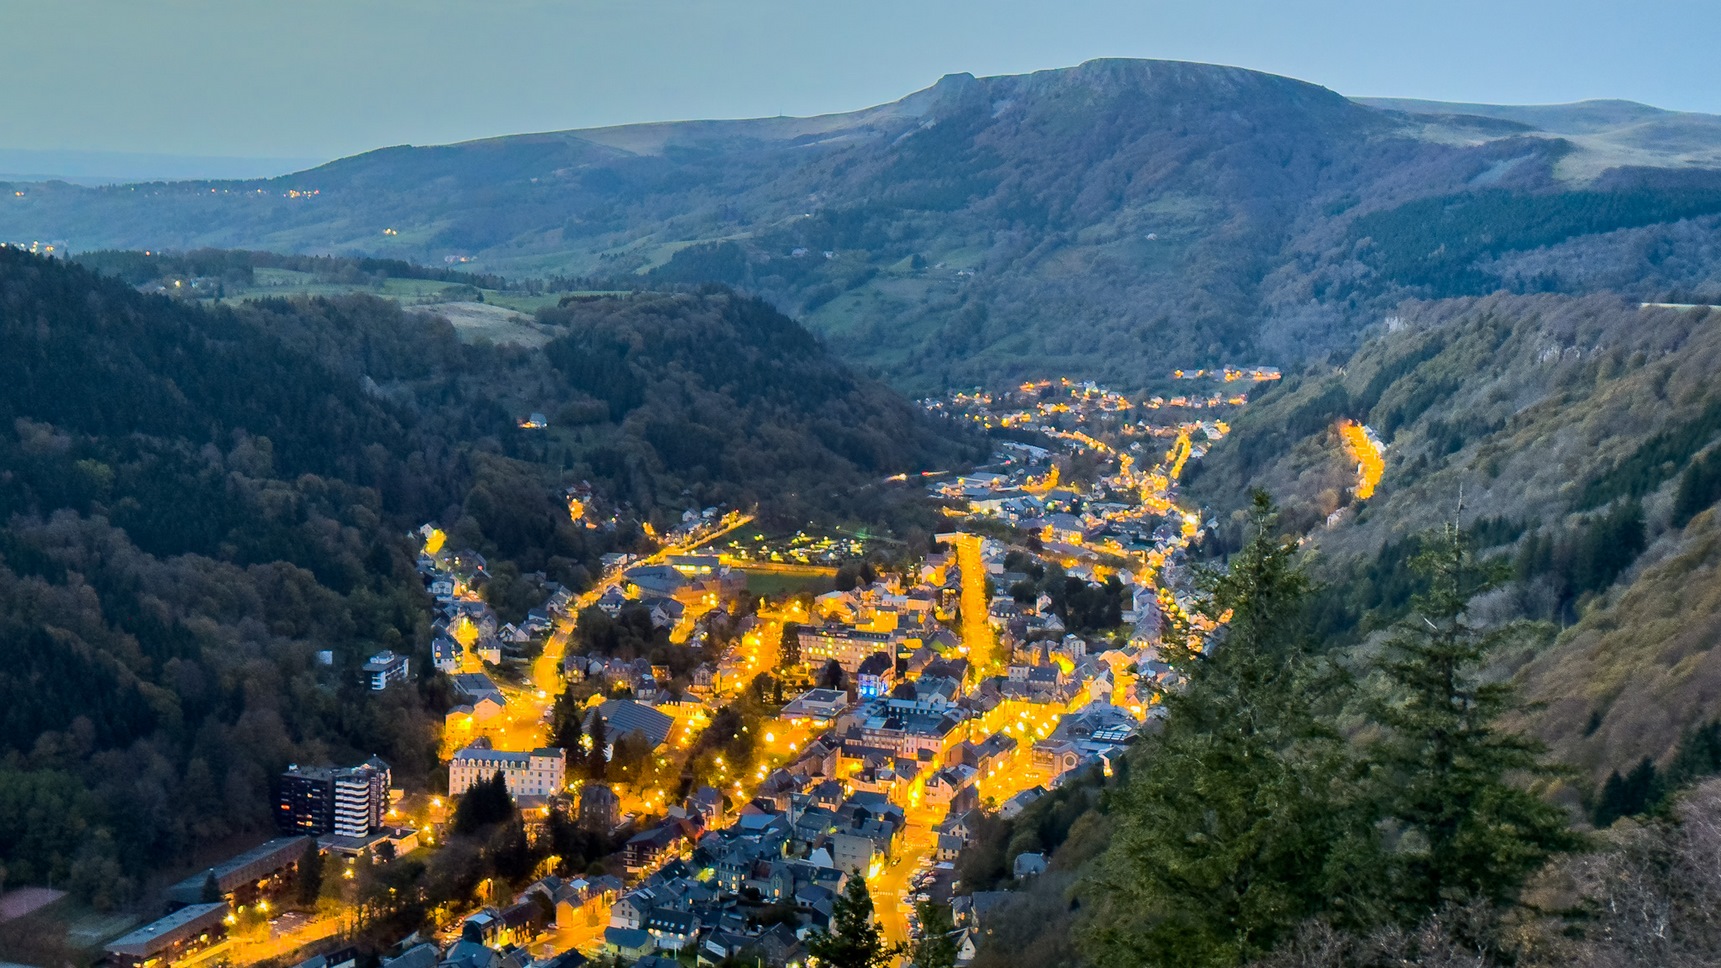 Grande Cascade plateau, magnificent view of the city of Mont Dore at nightfall